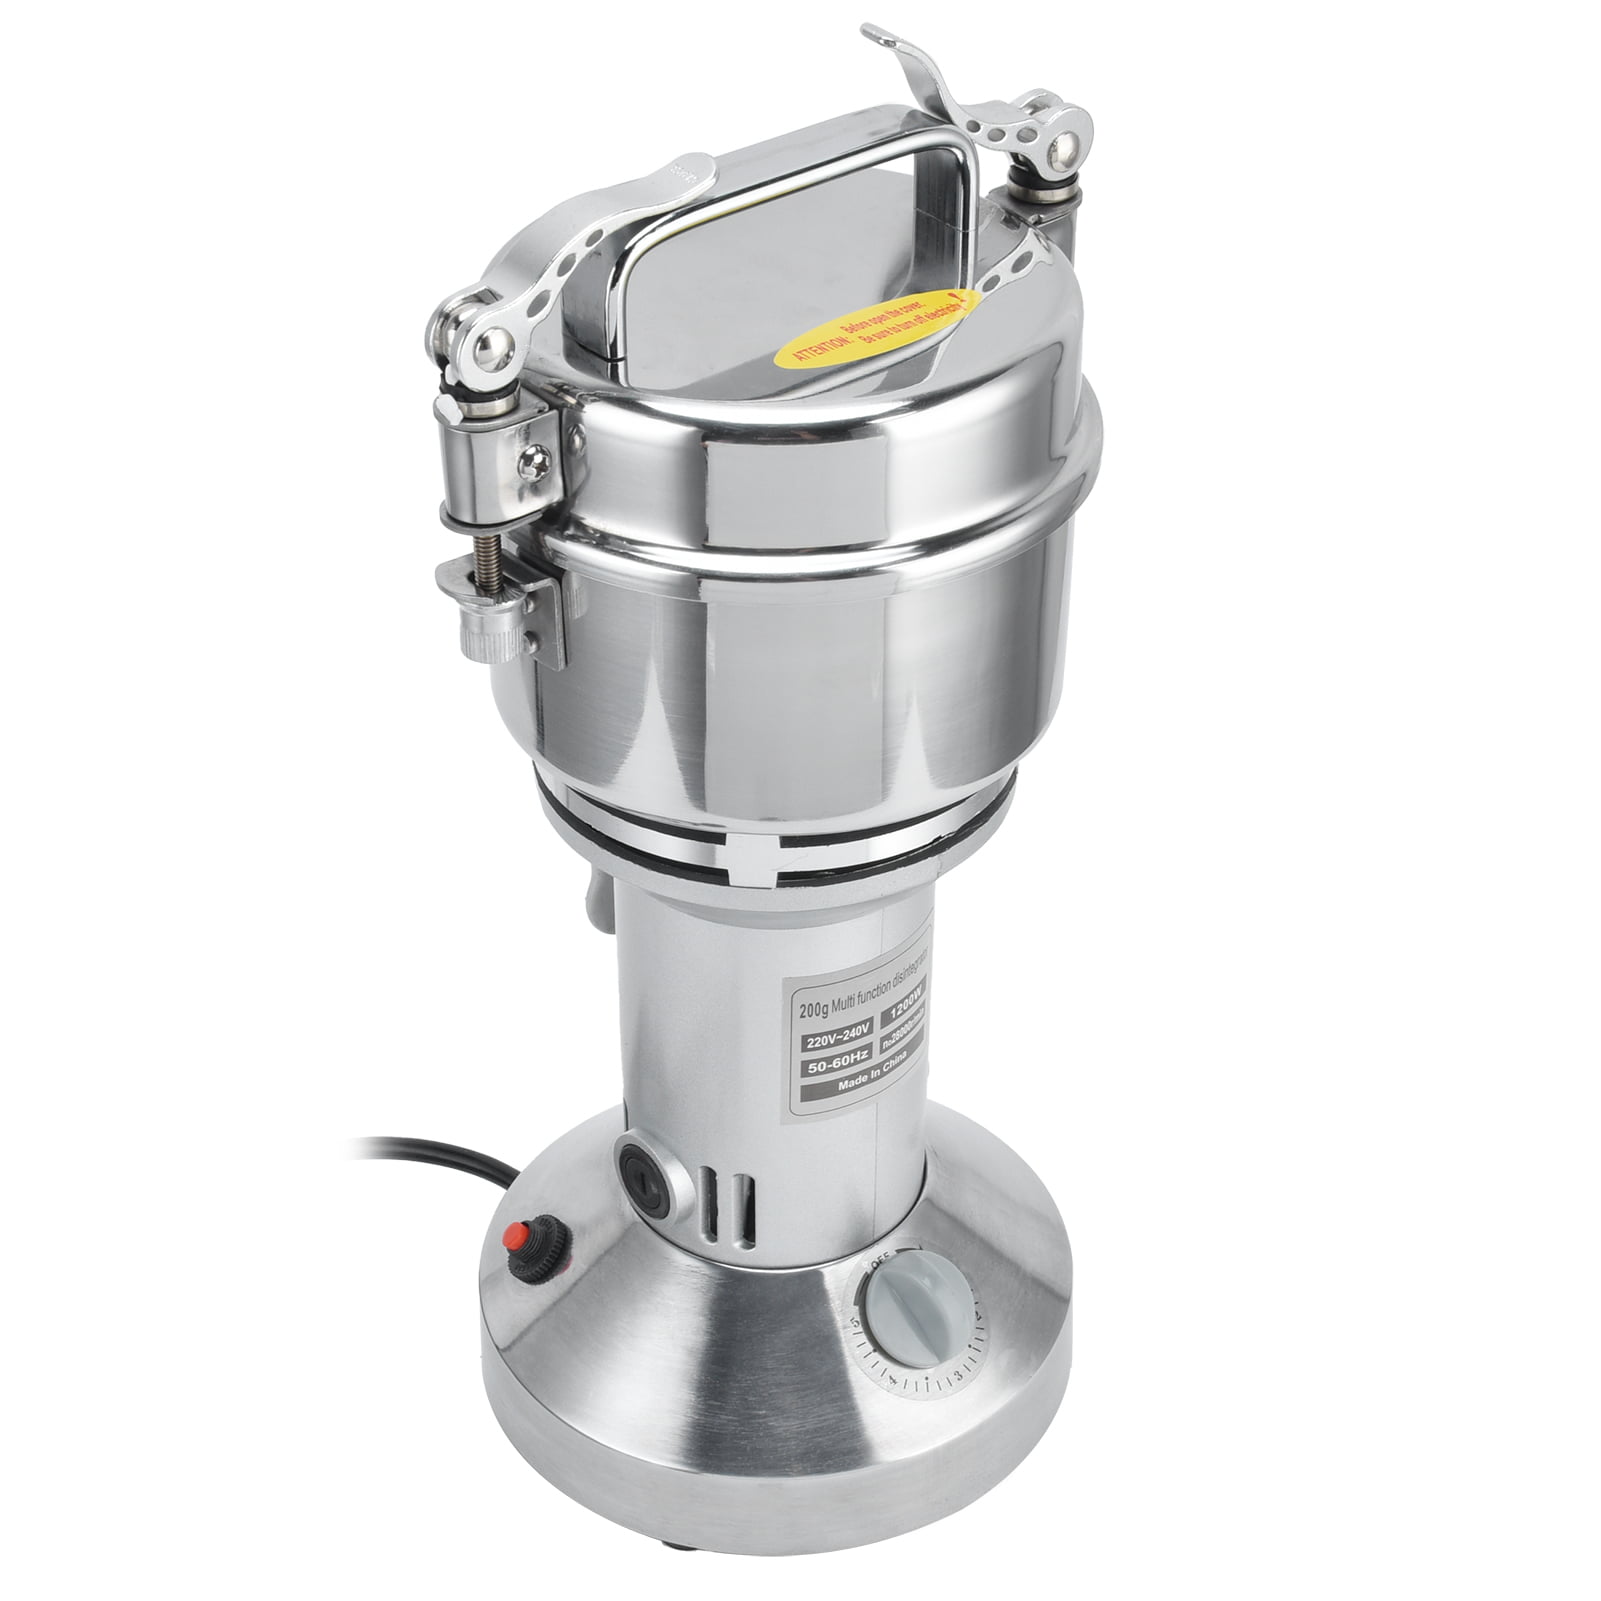 The Kitchen Mill - Stainless Steel Electric Grain Mill